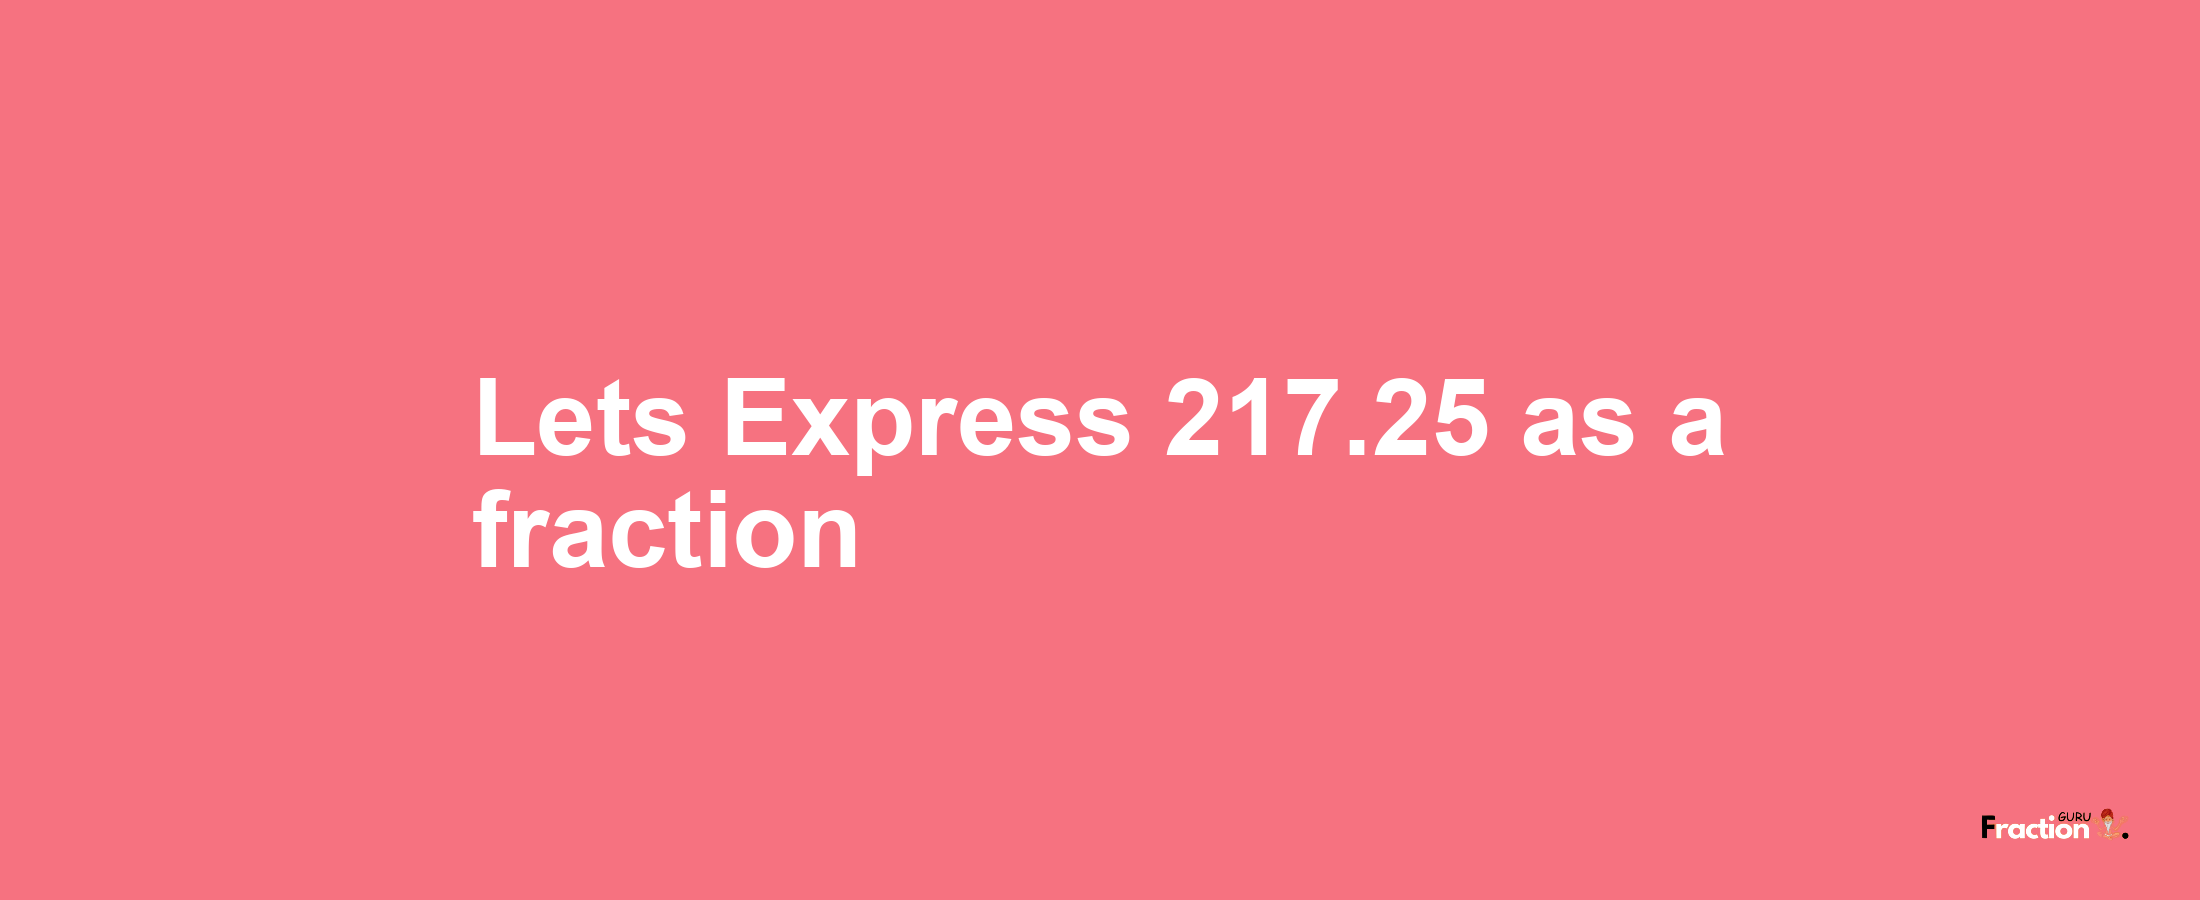 Lets Express 217.25 as afraction